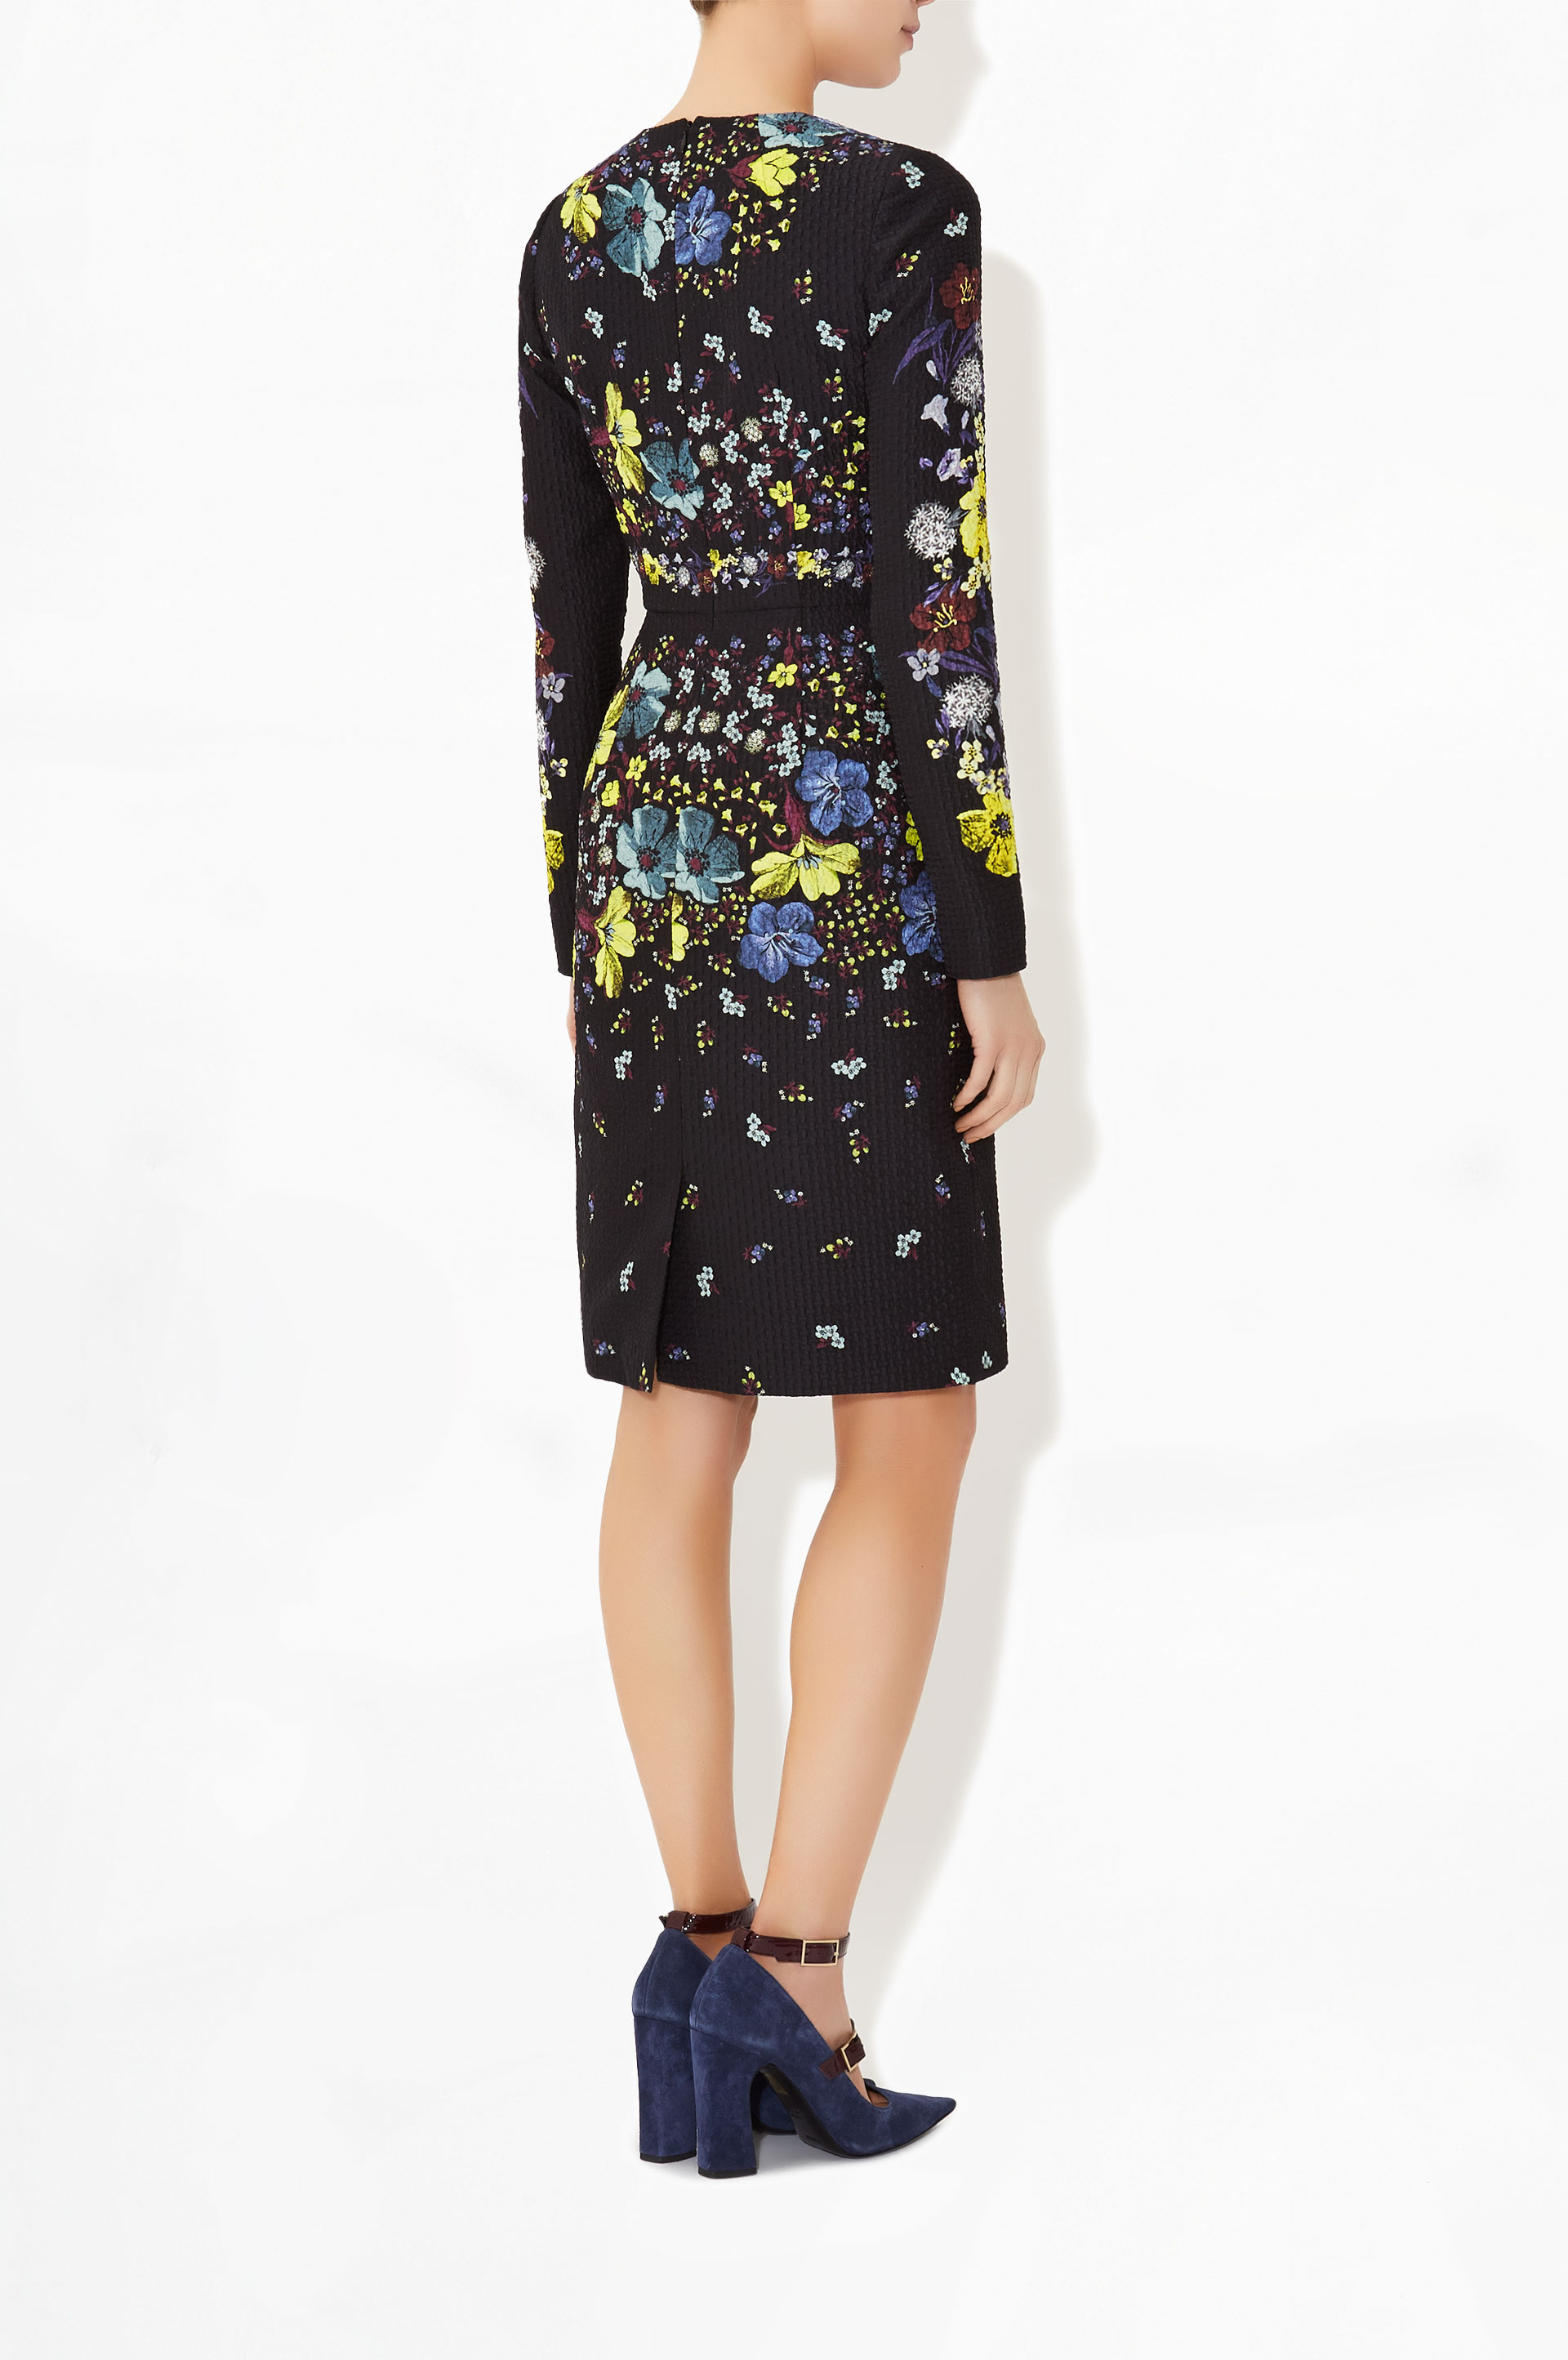 The back view of the Erdem Evita lily print dress